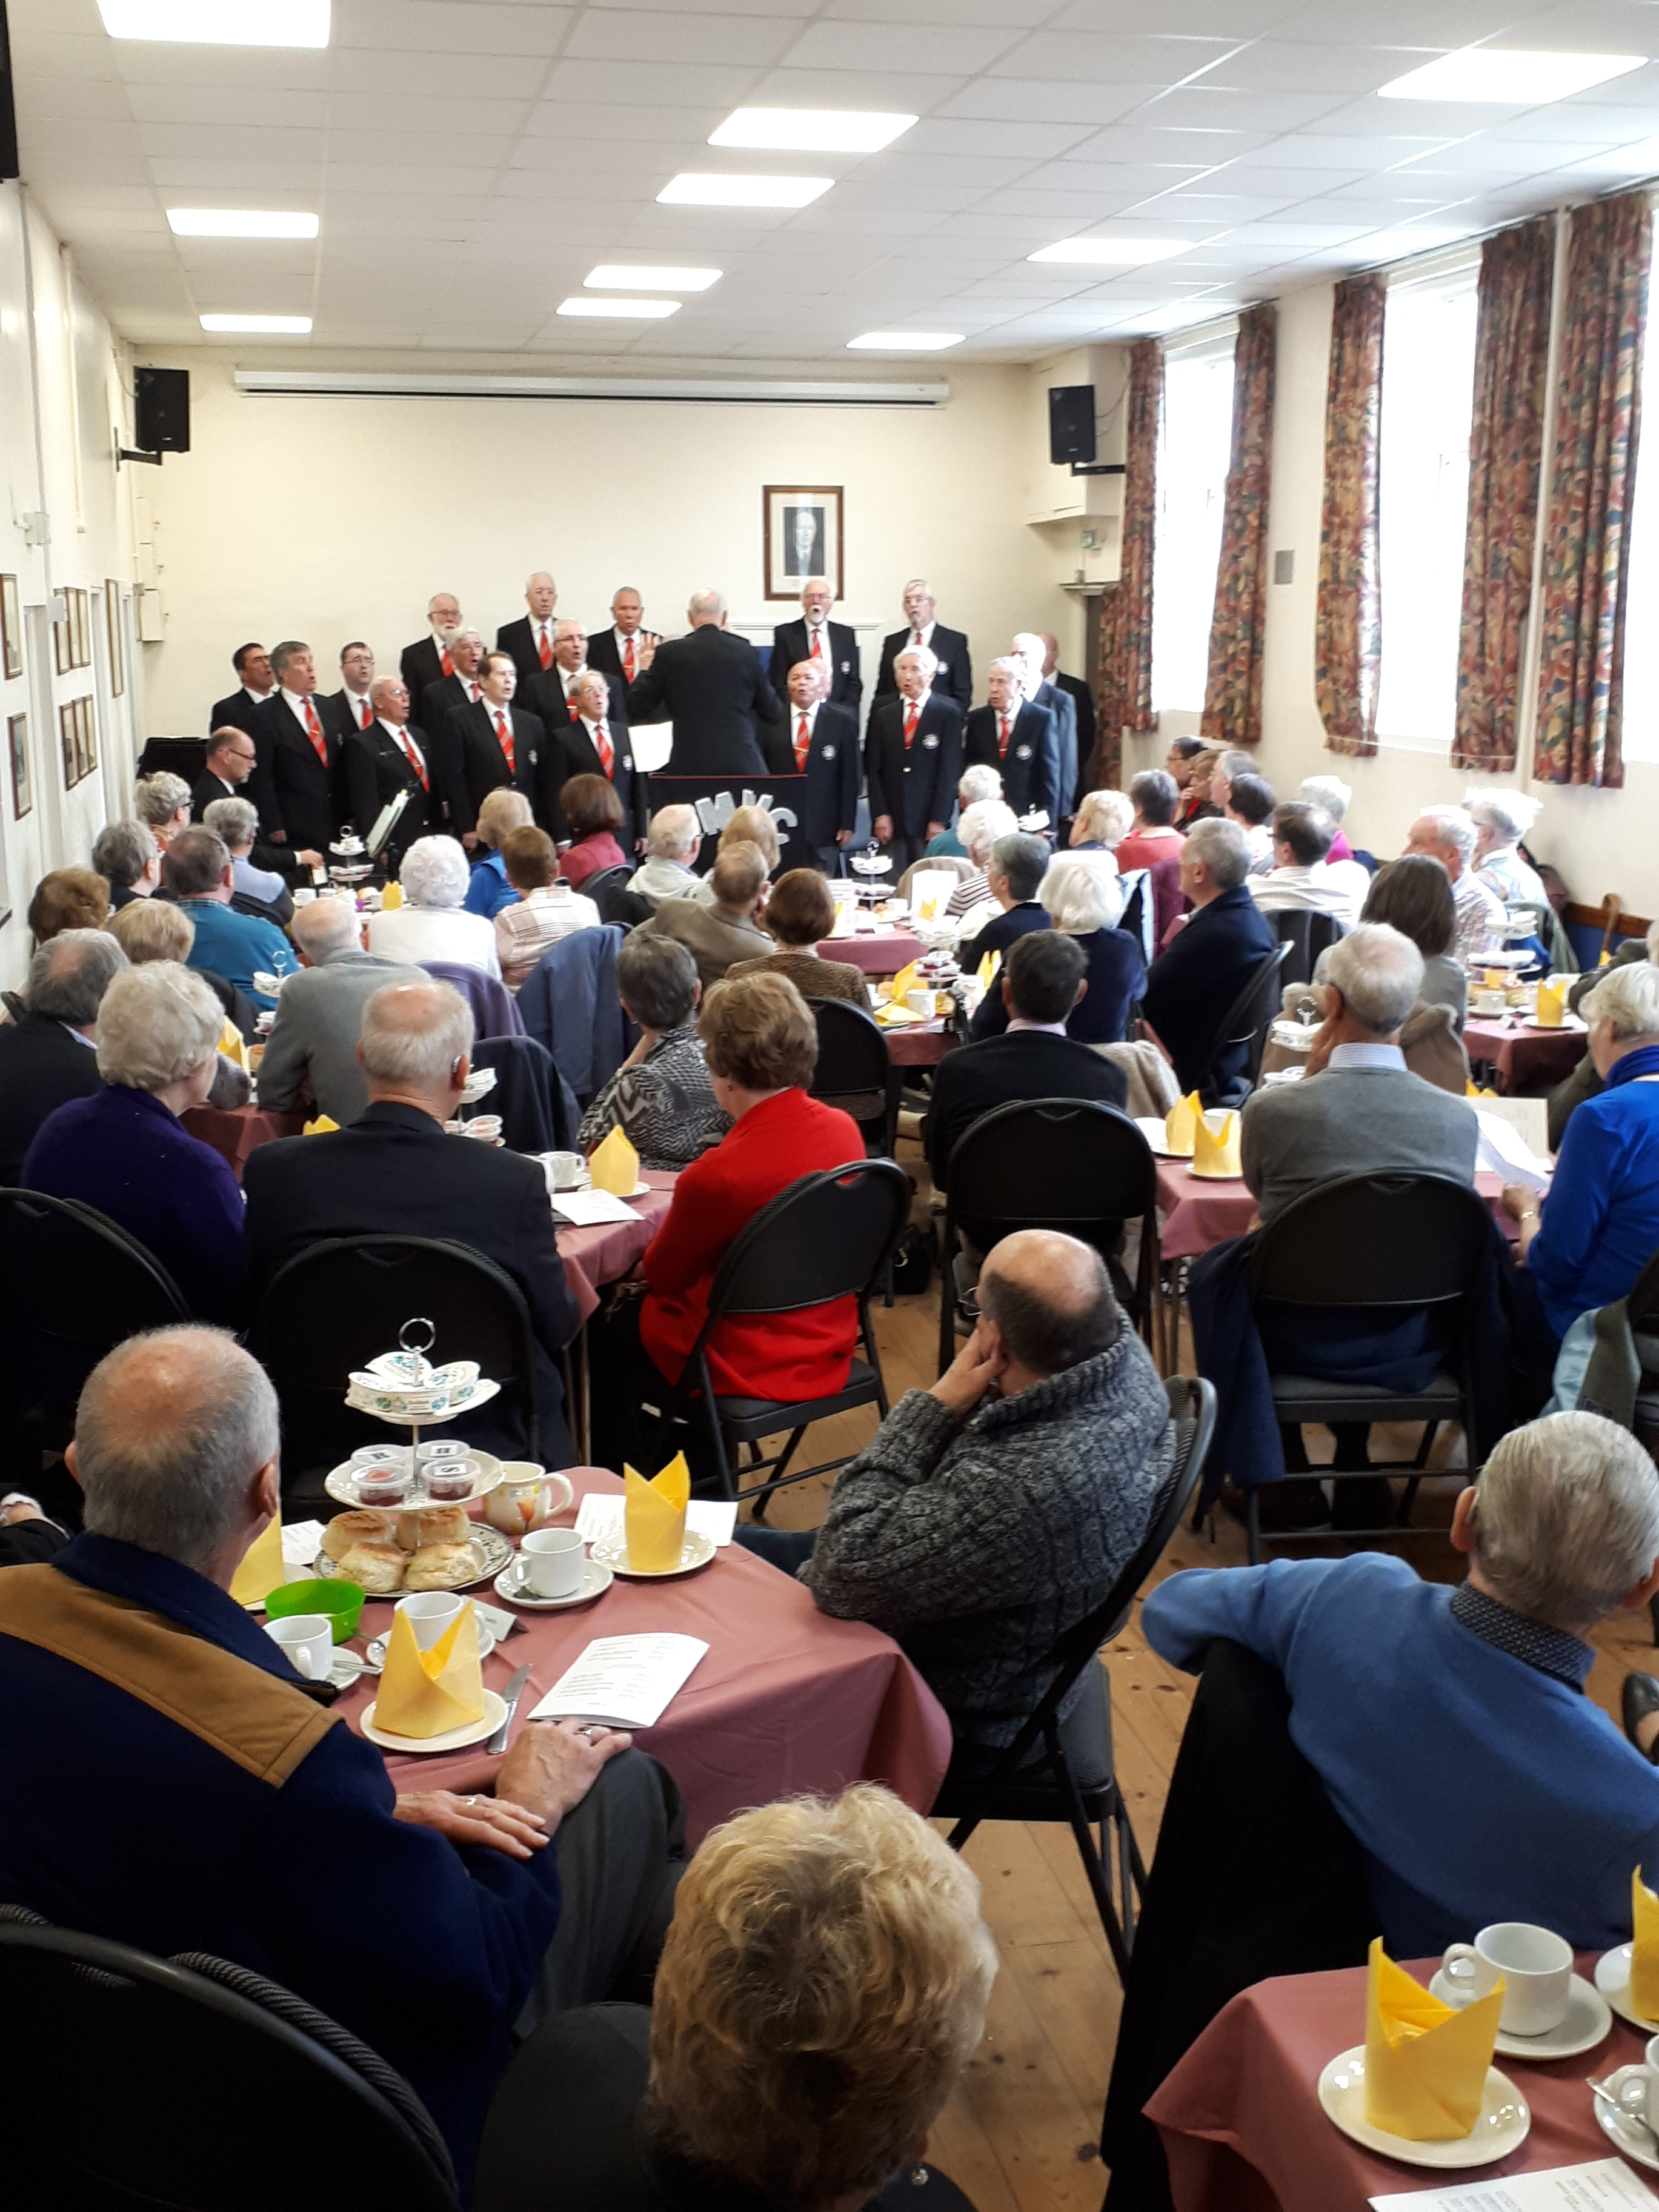 Full house for a very enjoyable afternoon with the Vauxhall Male Voice Choir - April 2019